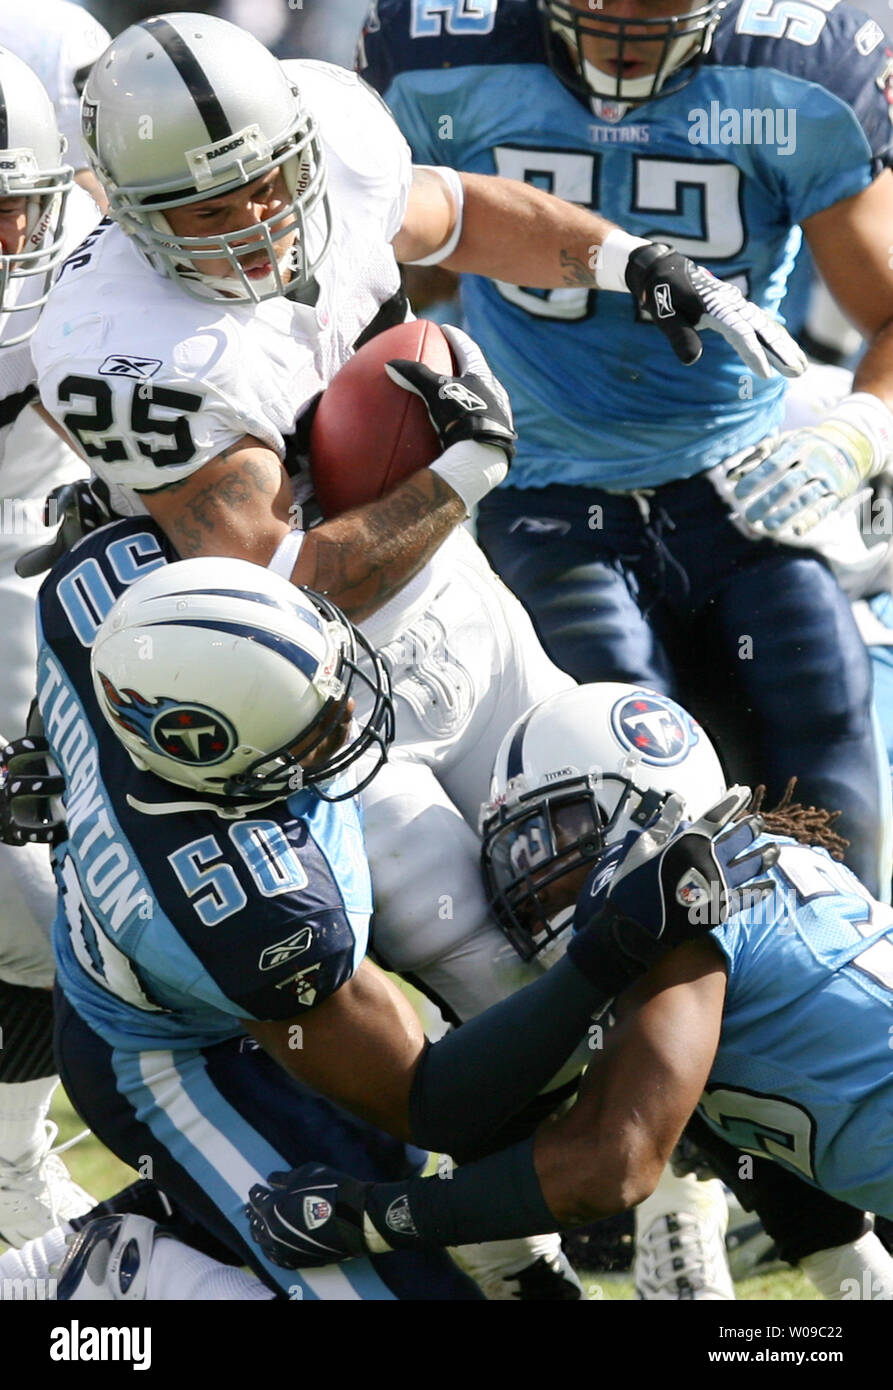 Tennessee Titans linebacker David Thornton (50) and Titans defensive back Michael Griffin (33) tackle Oakland Raiders runningback Justin Fargas (25) during a football game at LP Field in Nashville, Tennessee on October 28, 2007.  The Titans defeated the Raiders 13-9. (UPI Photo/Frederick Breedon IV) Stock Photo